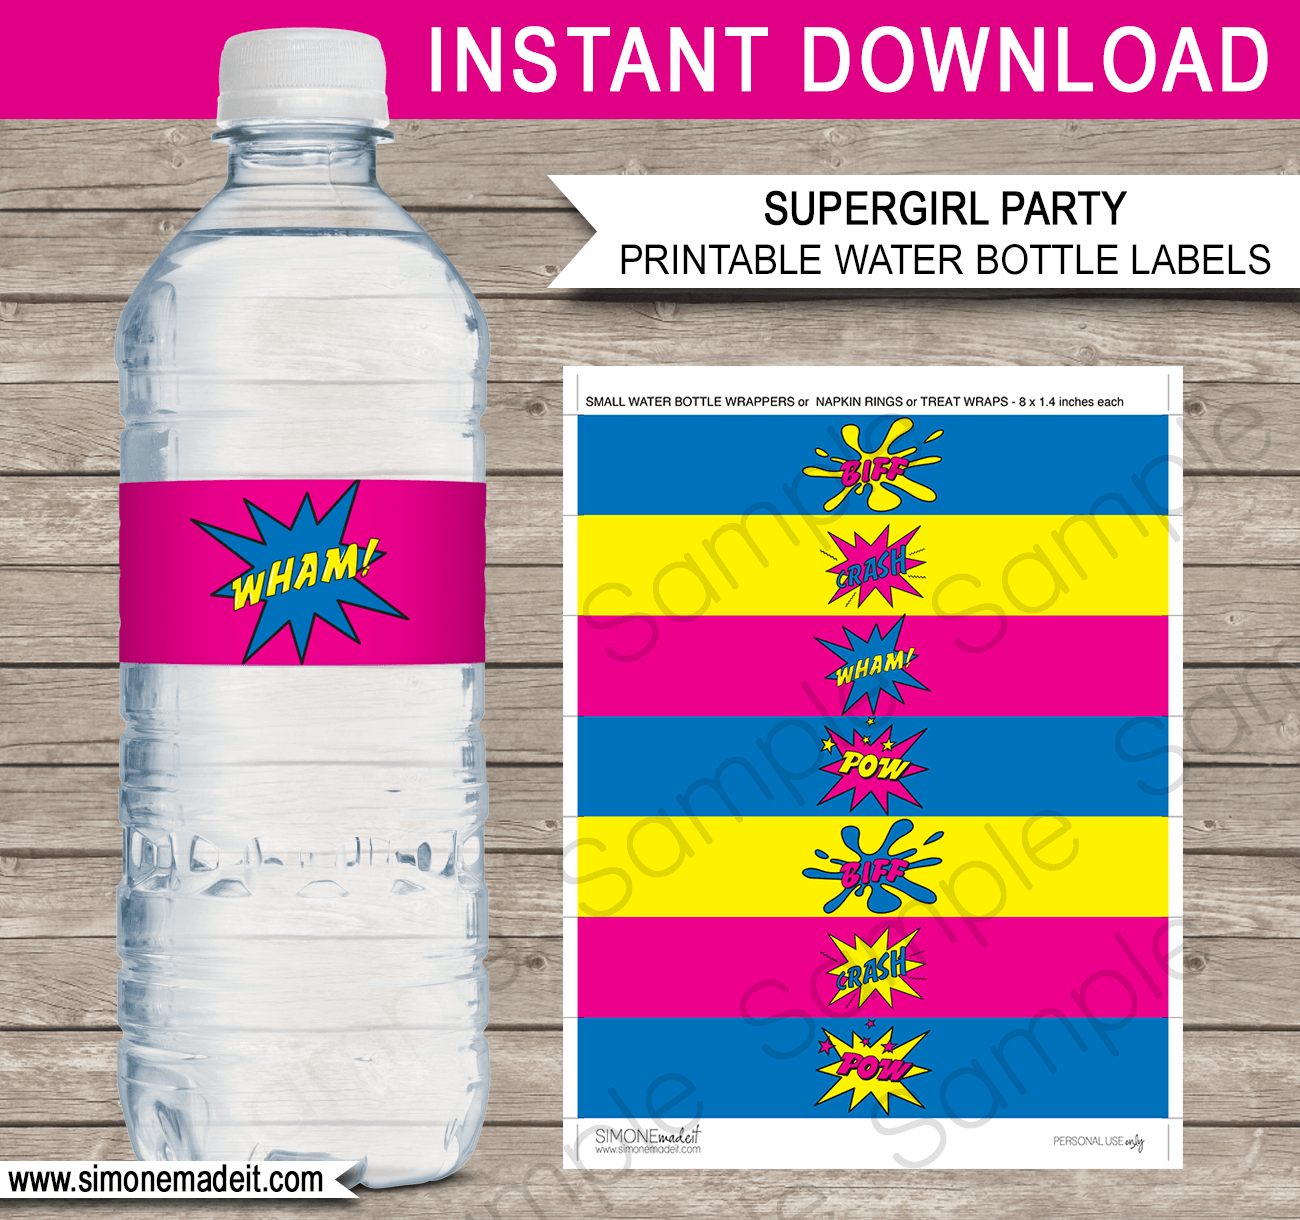 Printable Supergirl Party Water Bottle Labels Template | Super Hero Birthday Party Decorations | INSTANT DOWNLOAD via simonemadeit.com